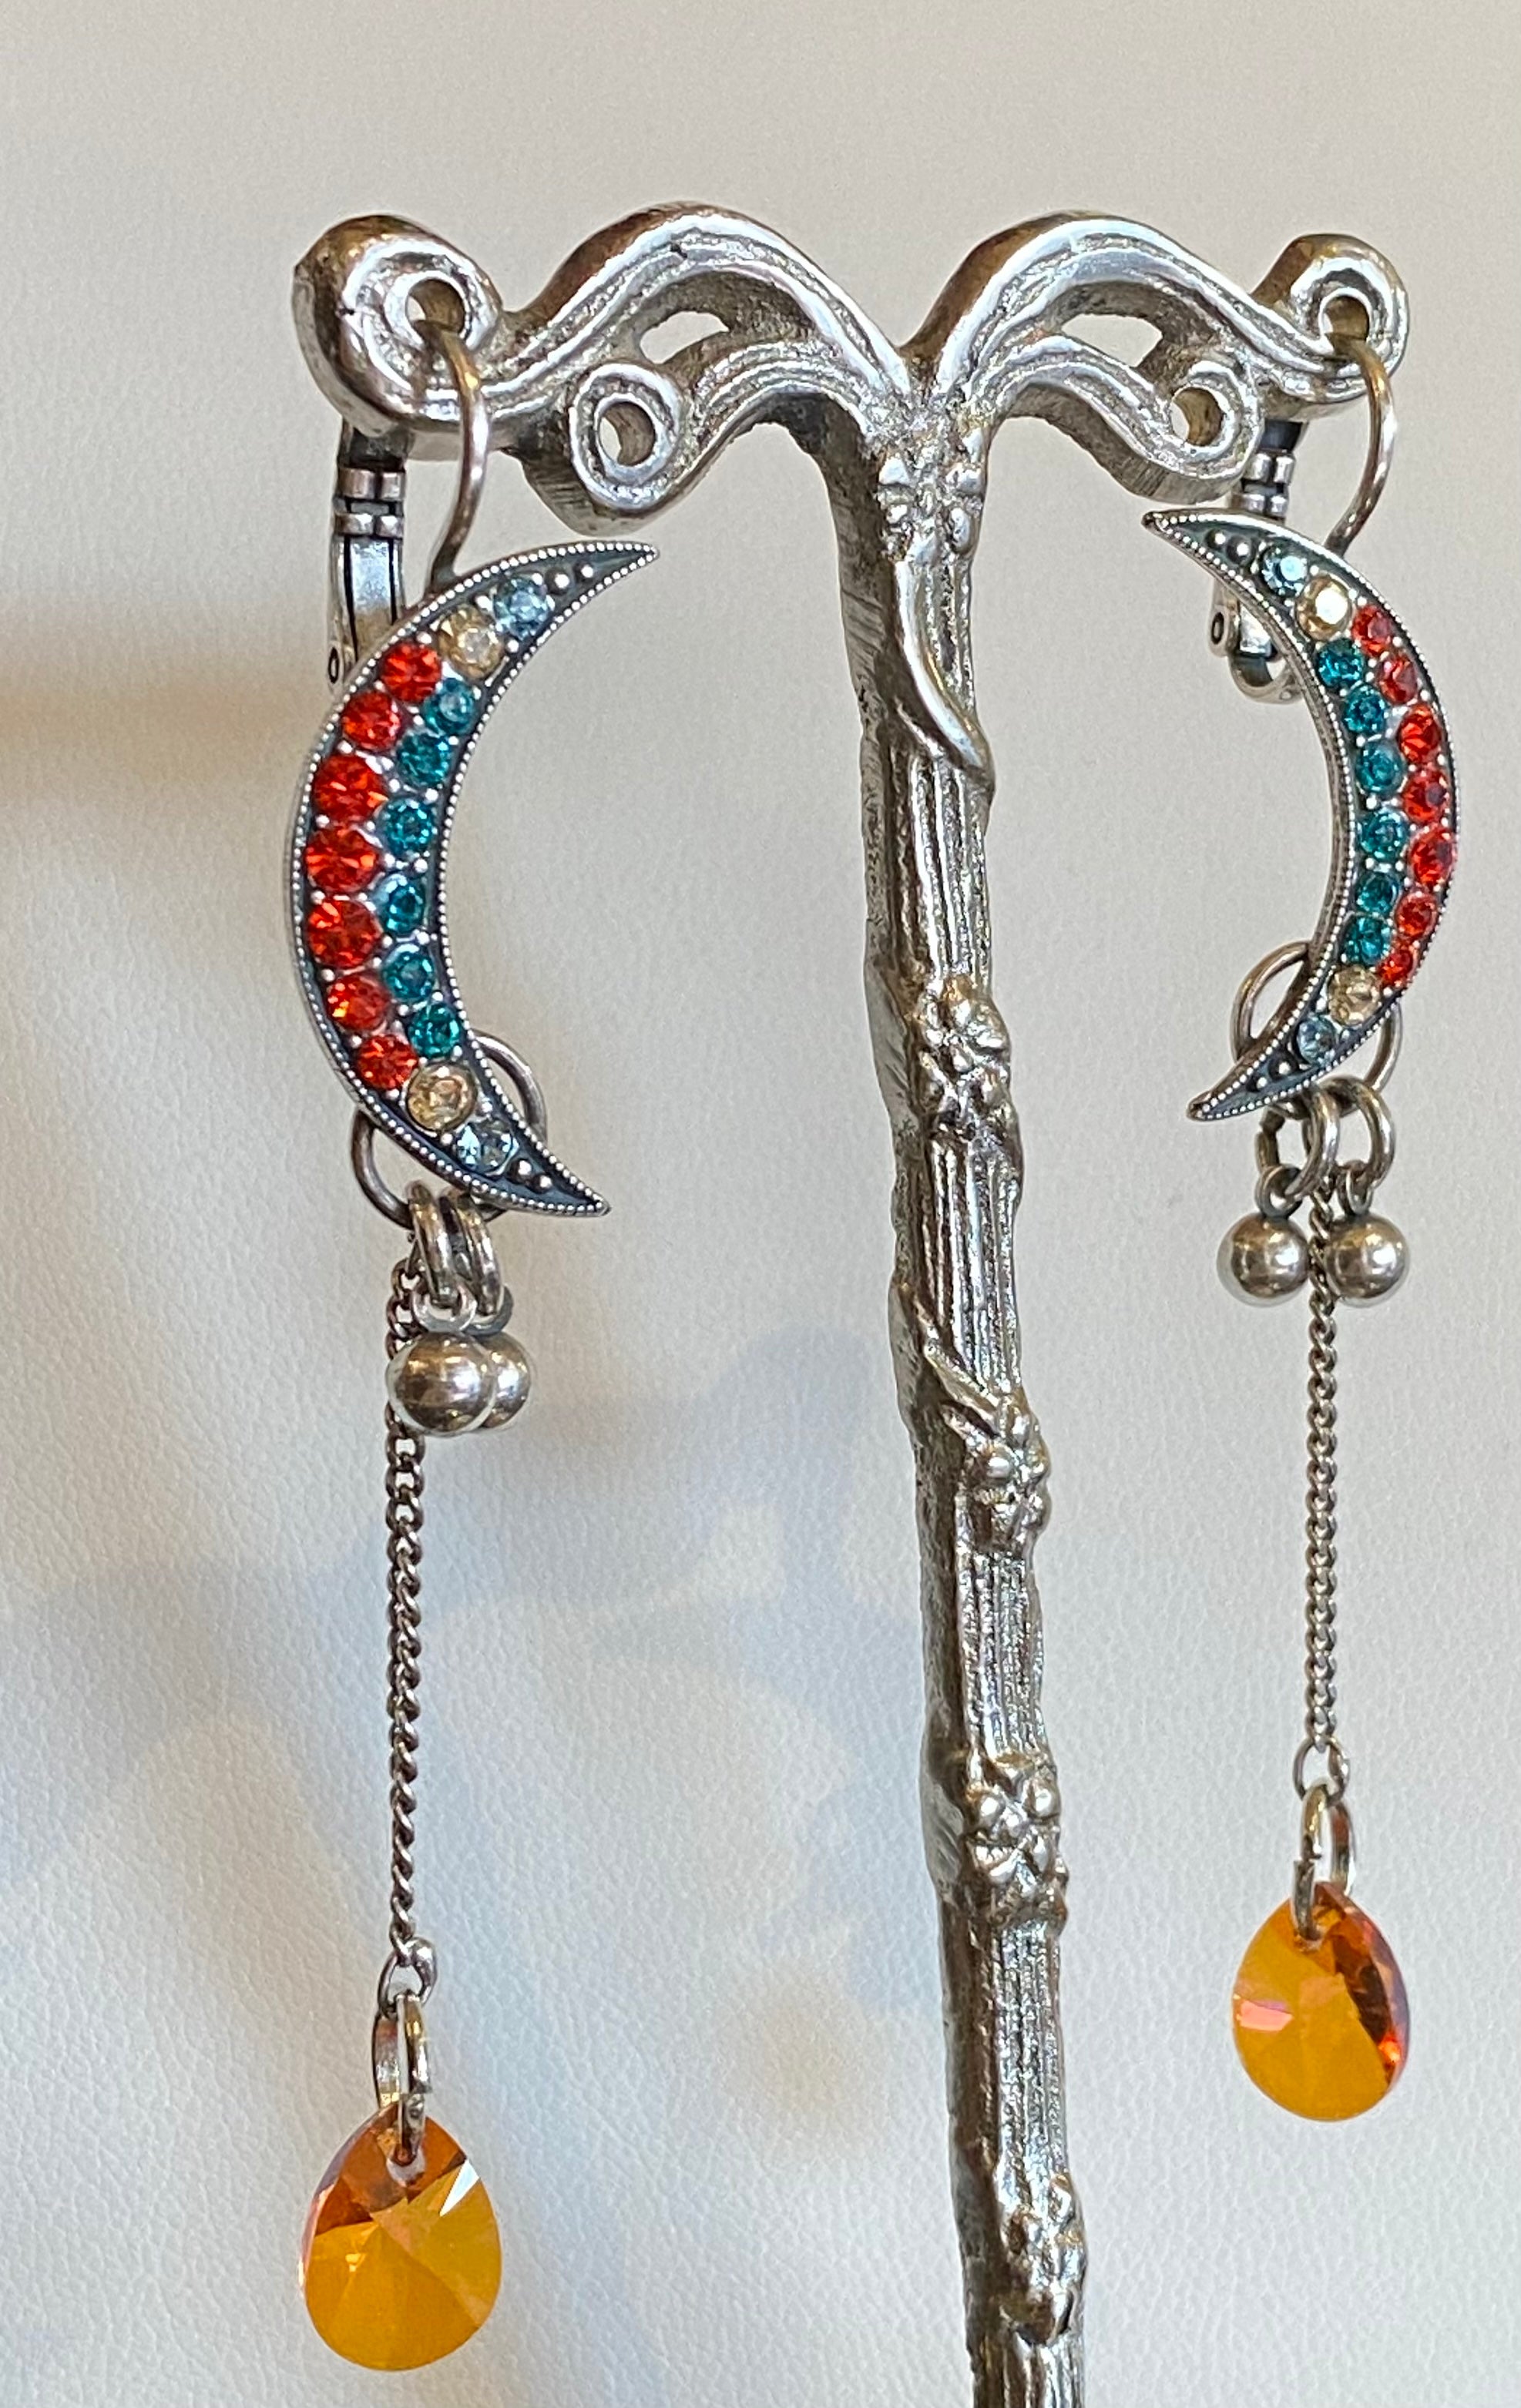 Mariana Antique Silver Plated Dangling Moon Crystal Earrings in “Tinsel”